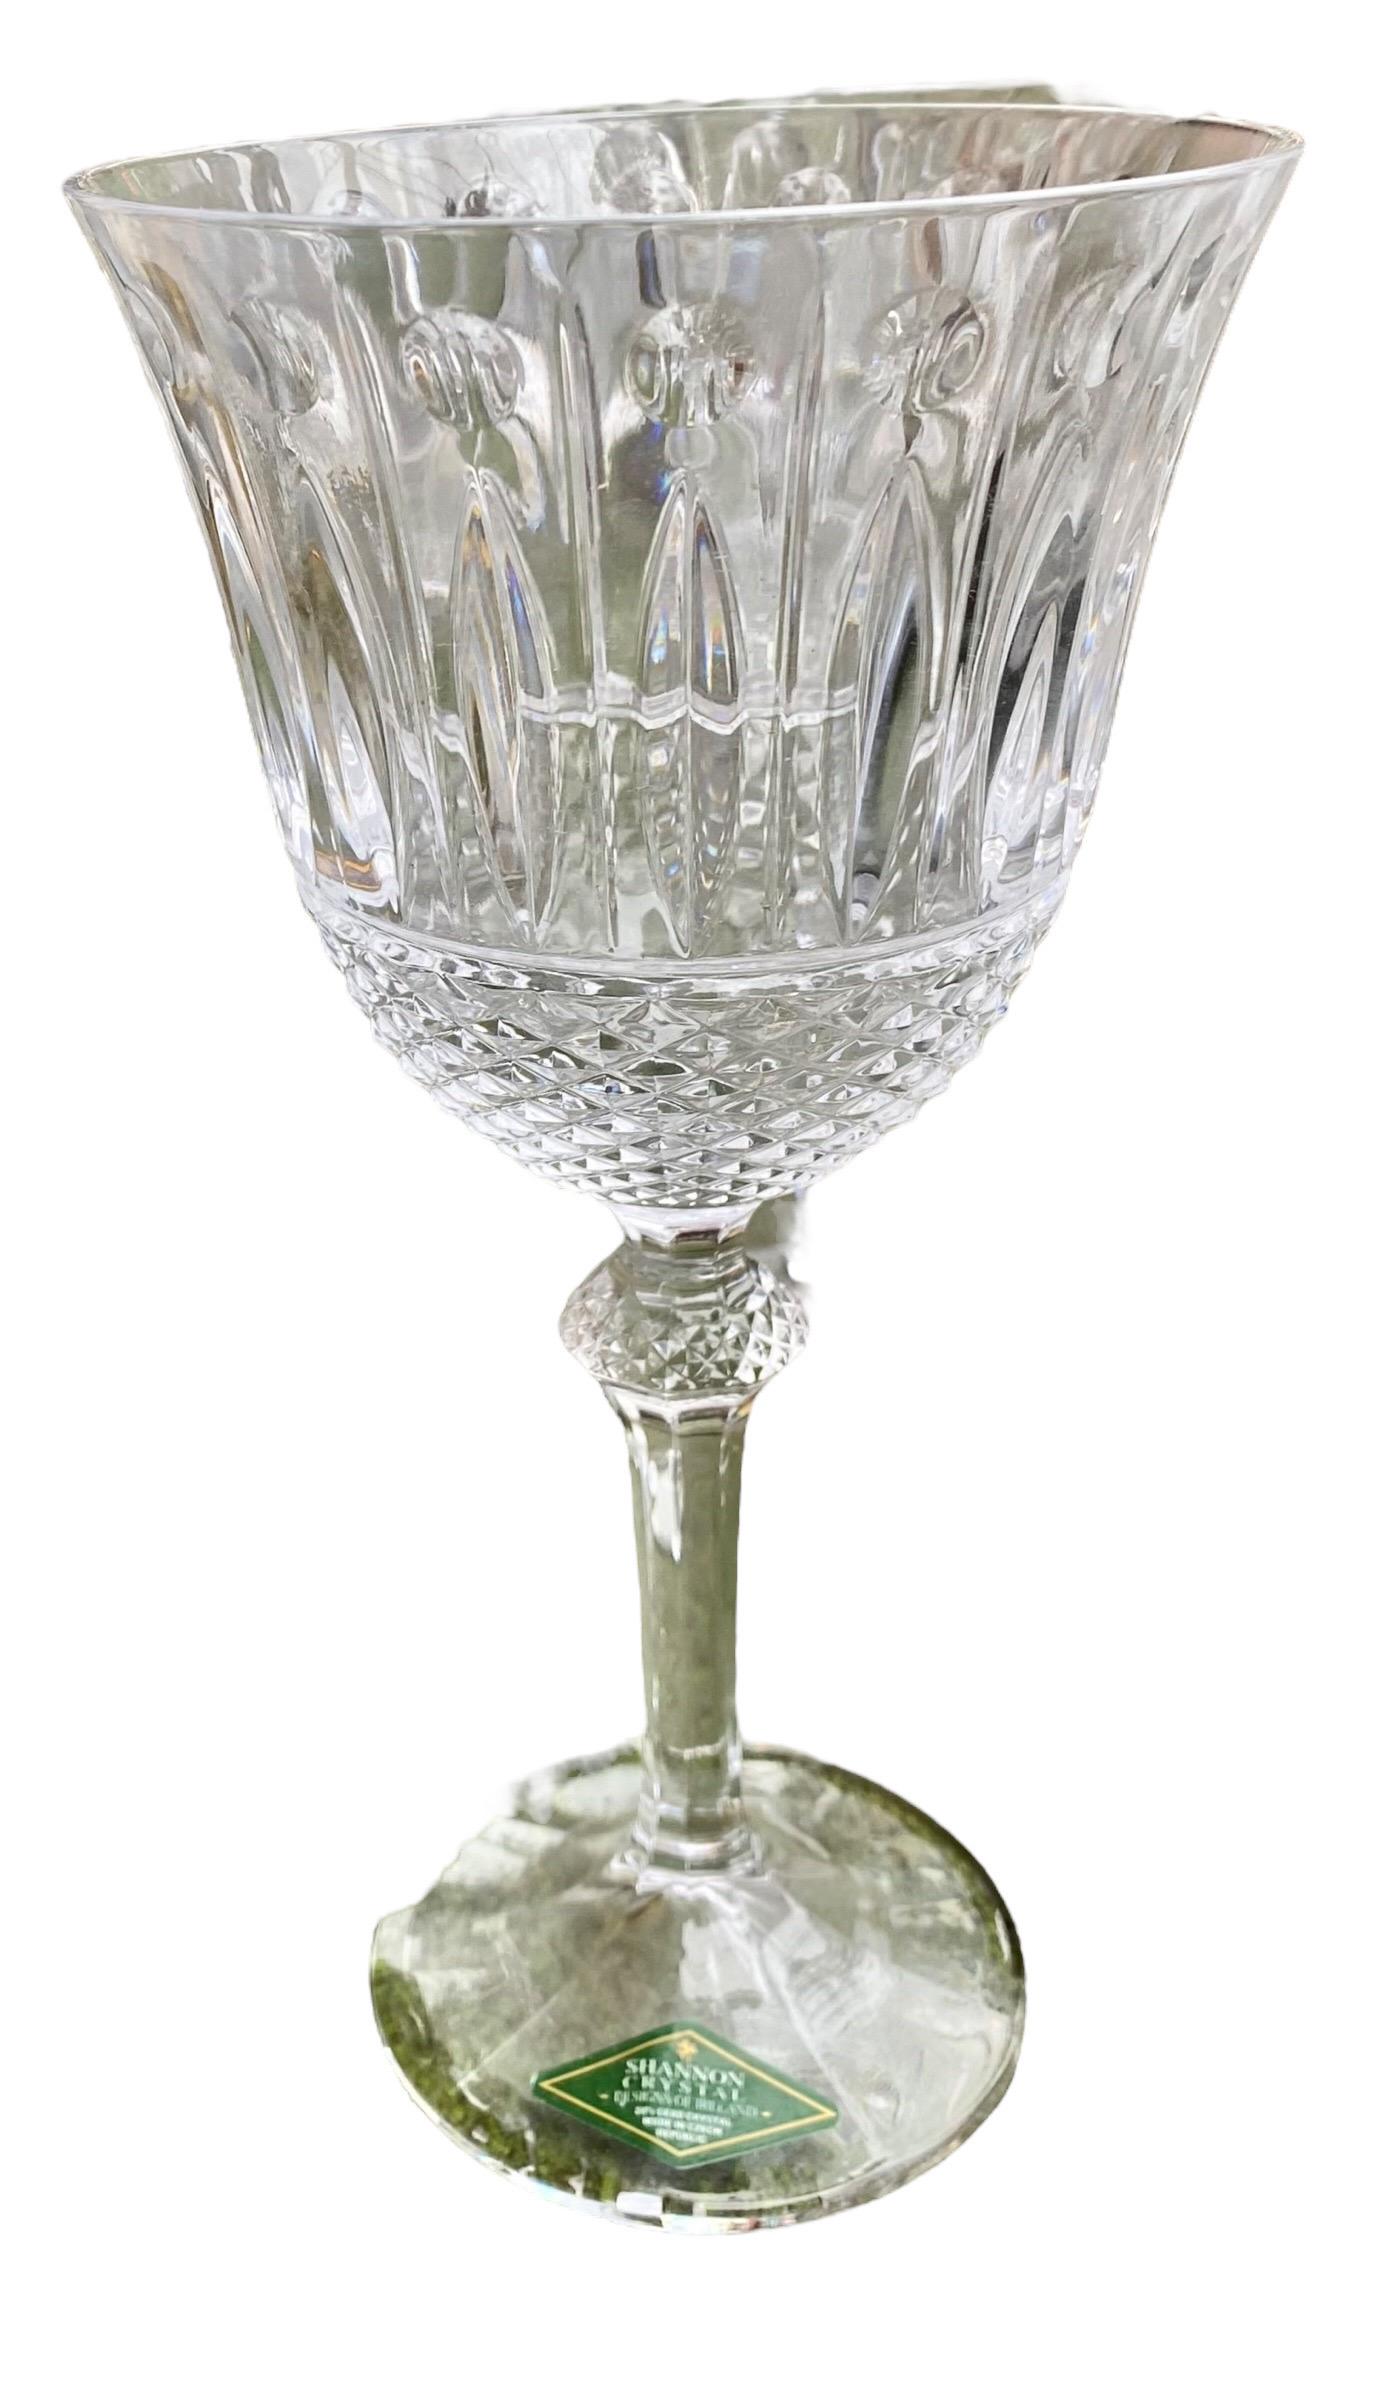 Offered for sale are four stemmed
Shannon by Godinger Sutton Place
Crystal water goblets, features are vertical cuts and crisscross pattern on upper portion of the bowl, stem has a button that is cut, both still retain original paper labels still